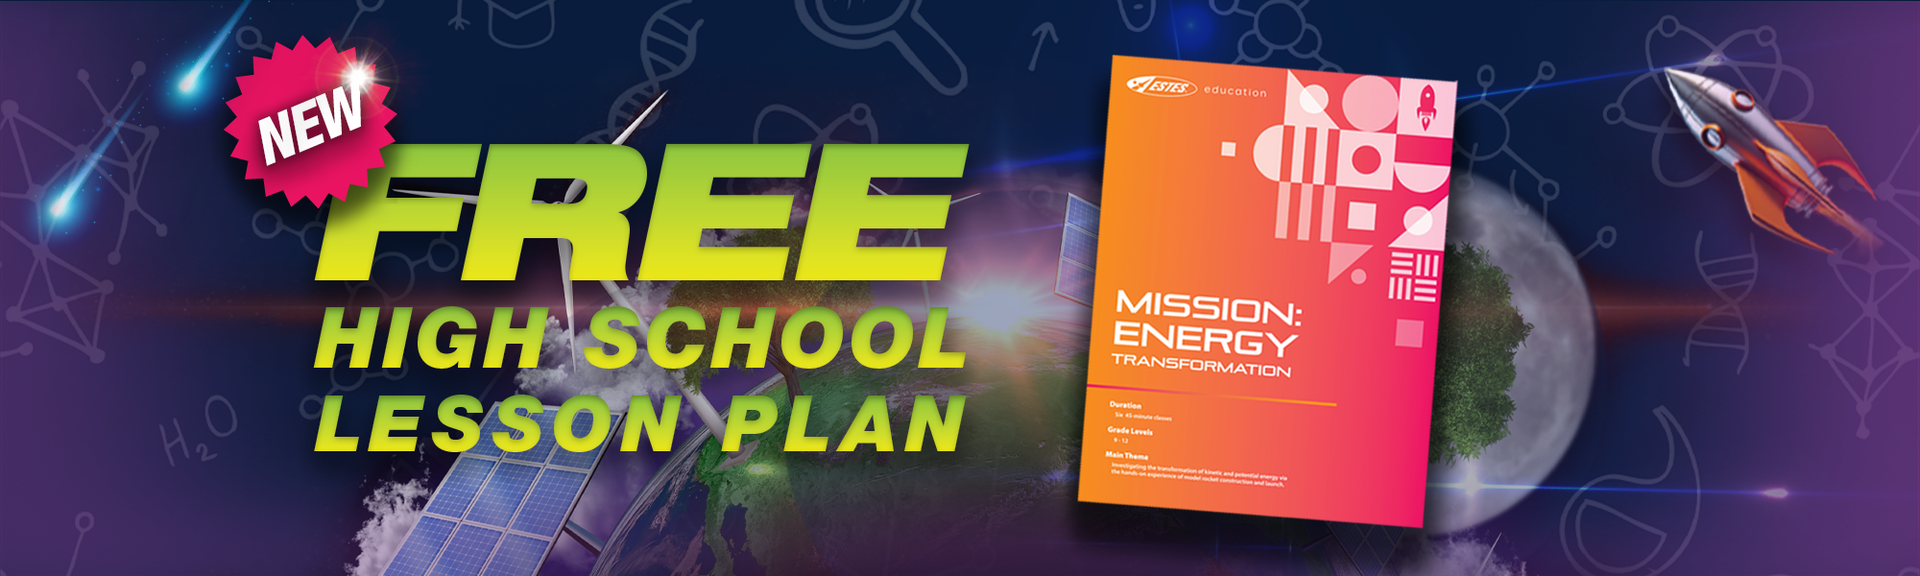 Mission: Energy Transformation Lesson Plan Banner